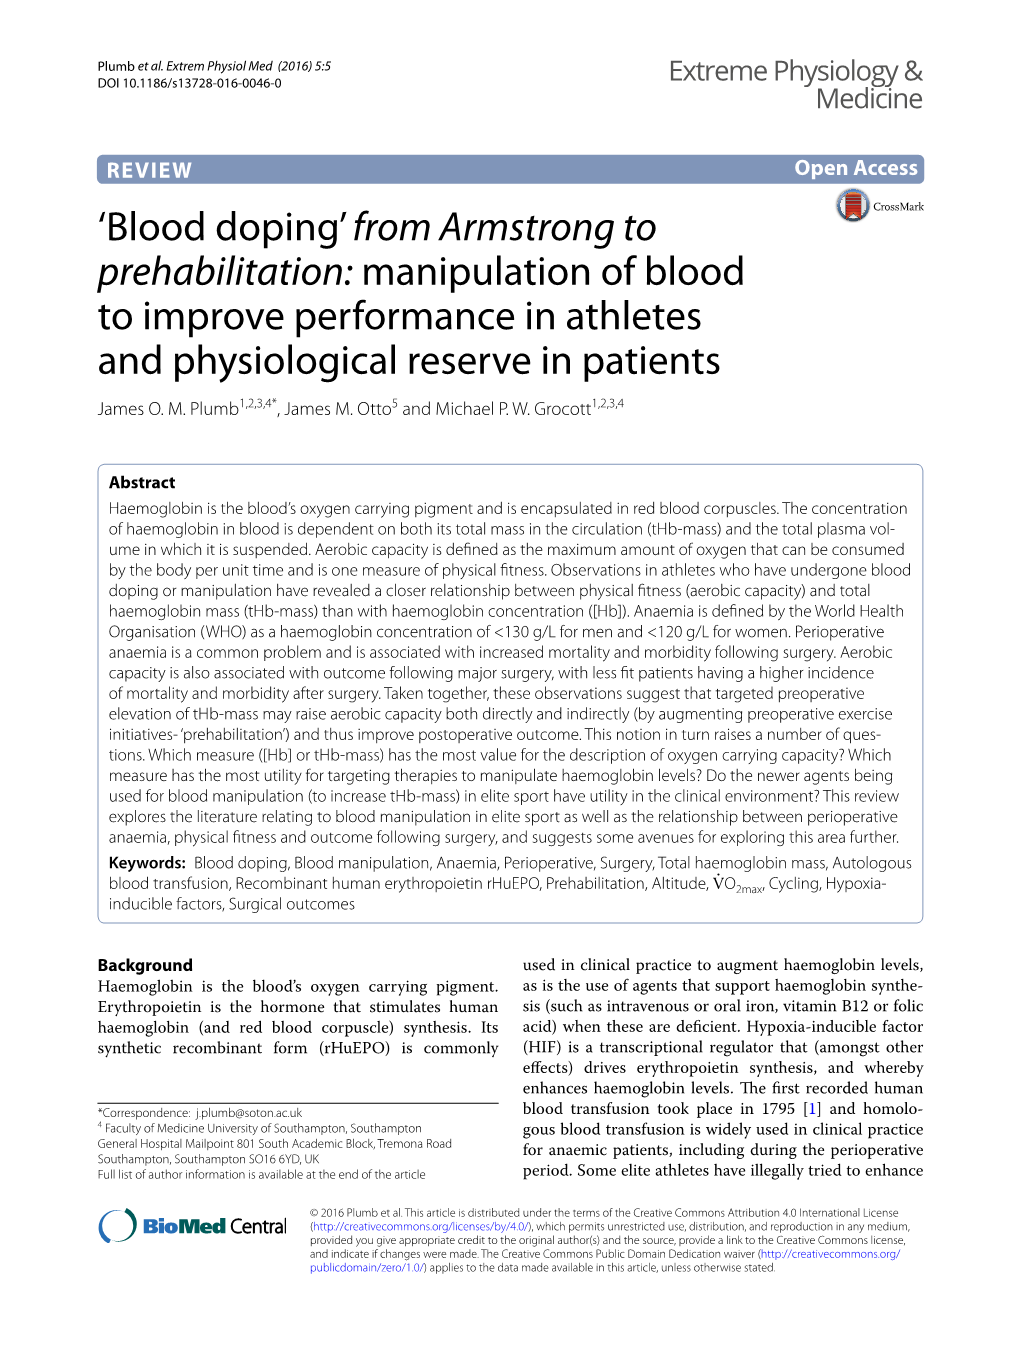 Blood Doping’ from Armstrong to Prehabilitation: Manipulation of Blood to Improve Performance in Athletes and Physiological Reserve in Patients James O